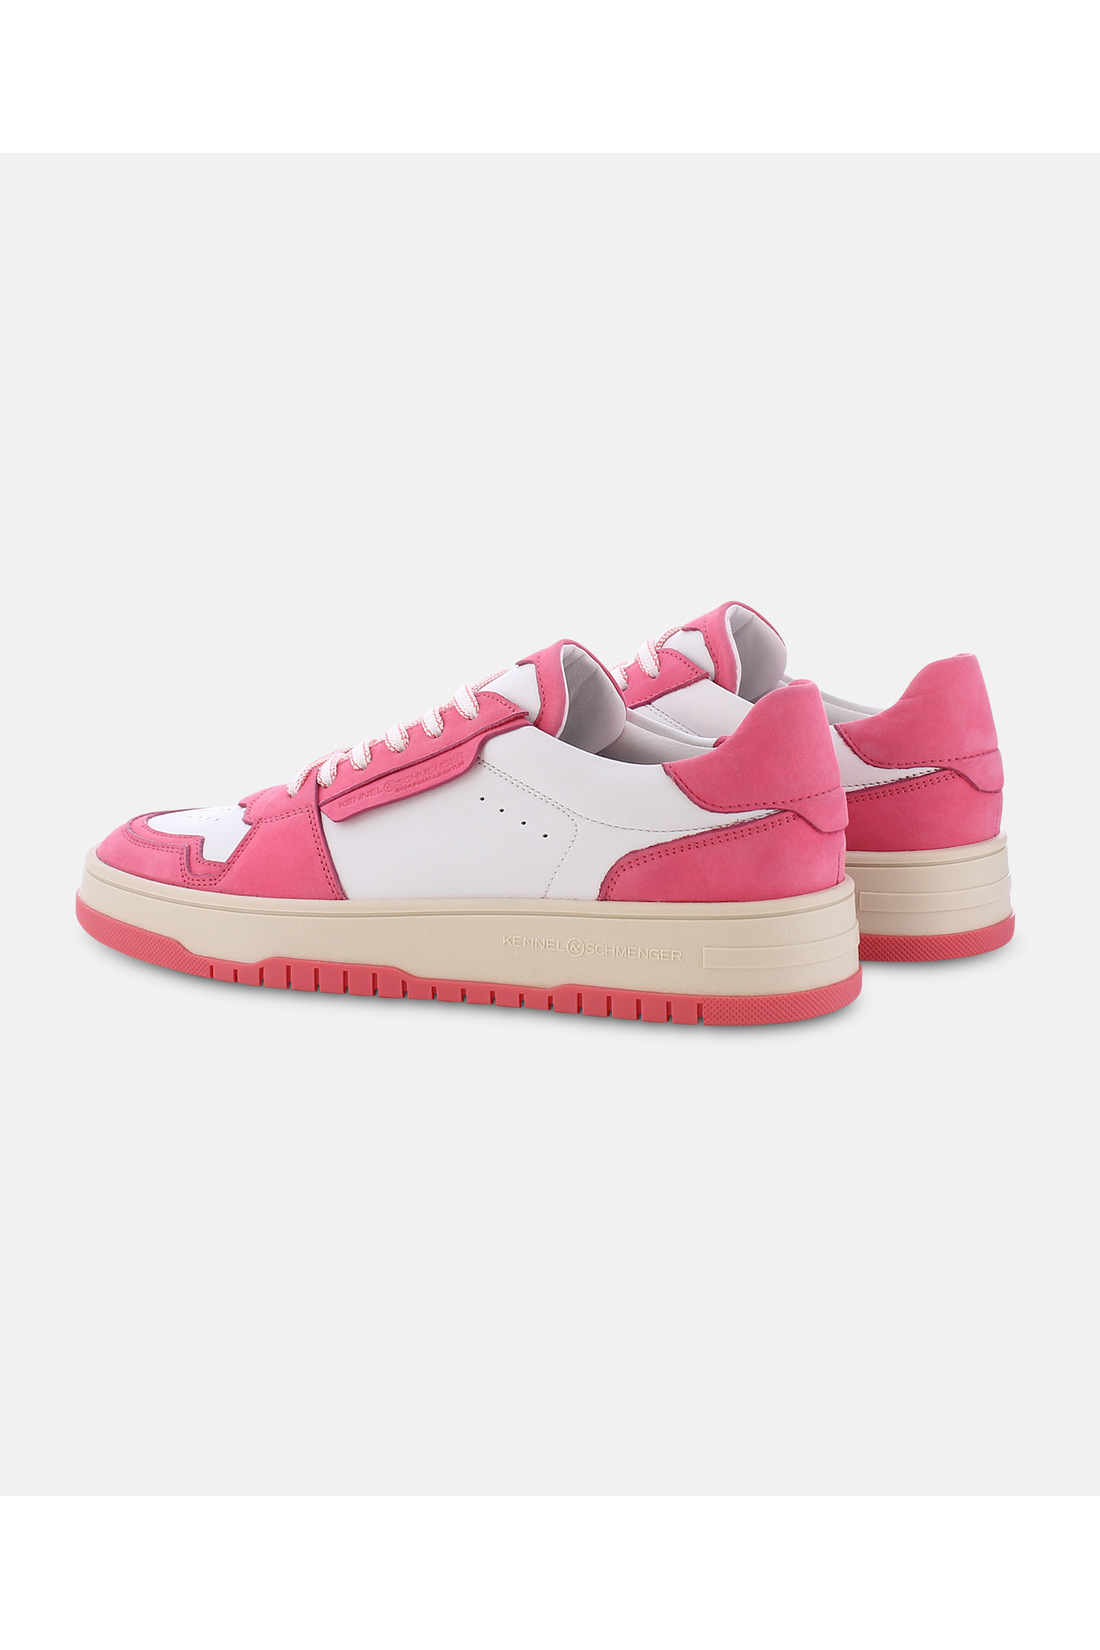 Kennel-Schmenger-OUTLET-SALE-DRIFT-Sneakers-ARCHIVE-COLLECTION-2.png